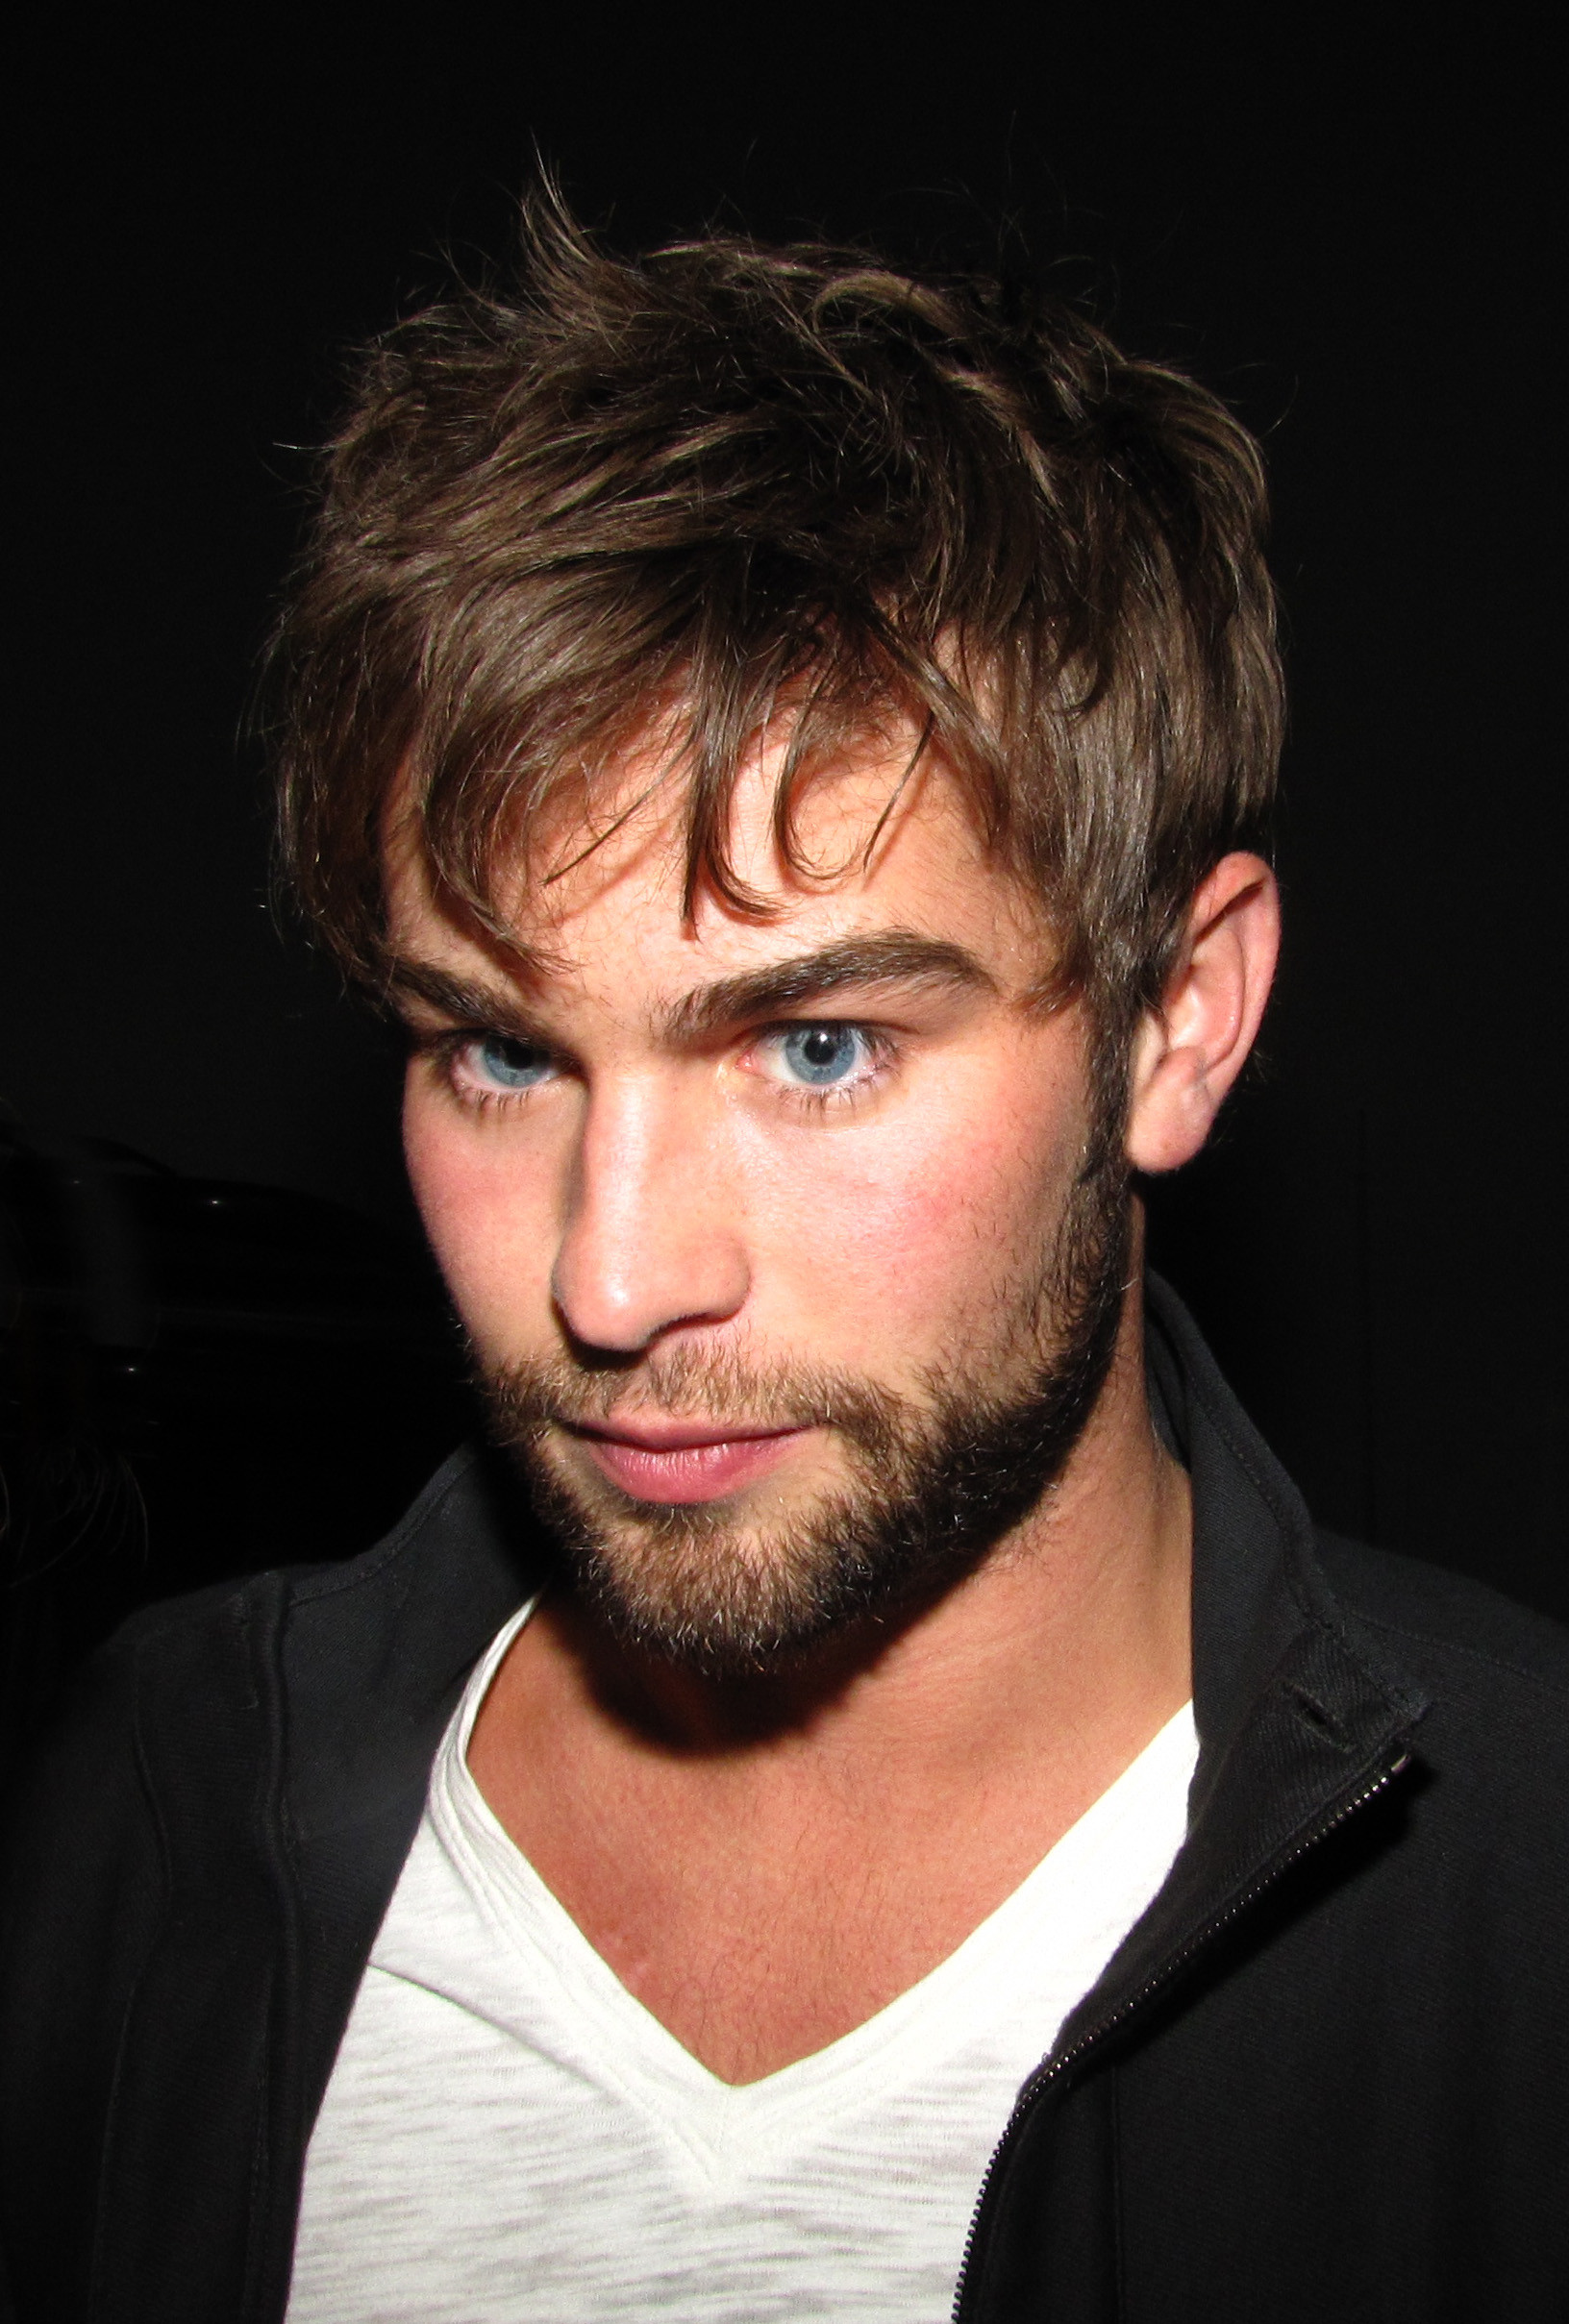 1632x2418 Chace Crawford Photos. Prev Slide Play Pause Next Slide